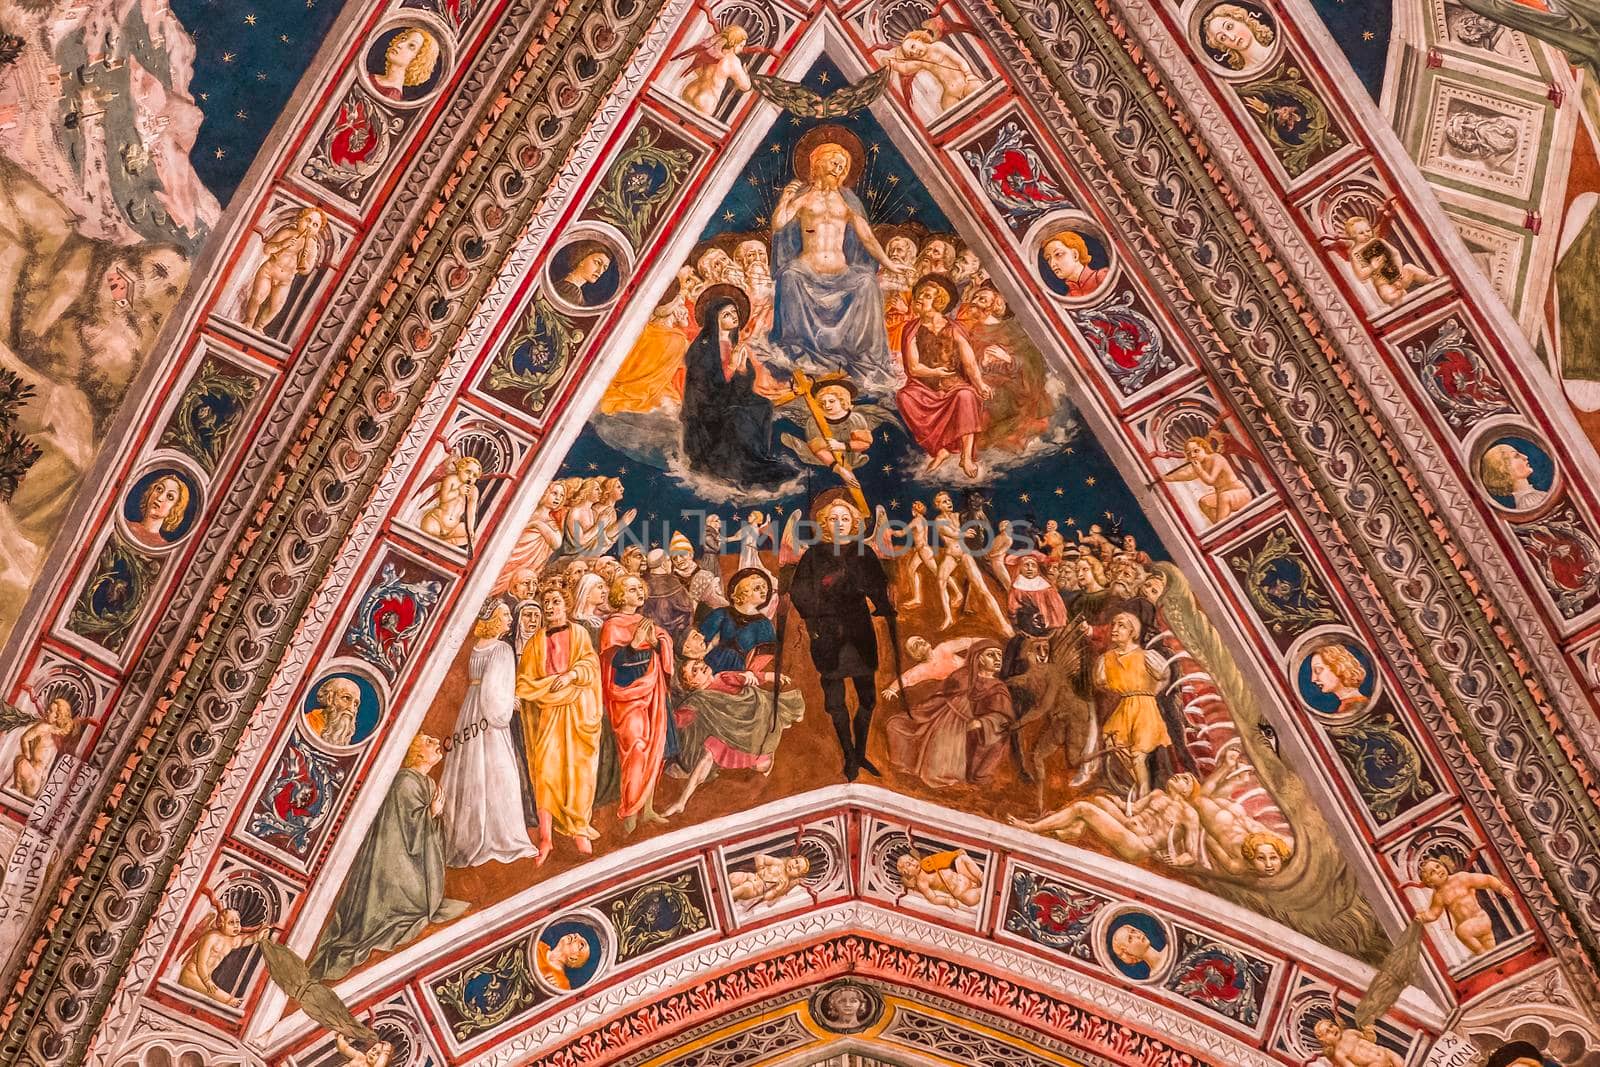 interiors and decors of the baptistery, Siena, Italy by photogolfer